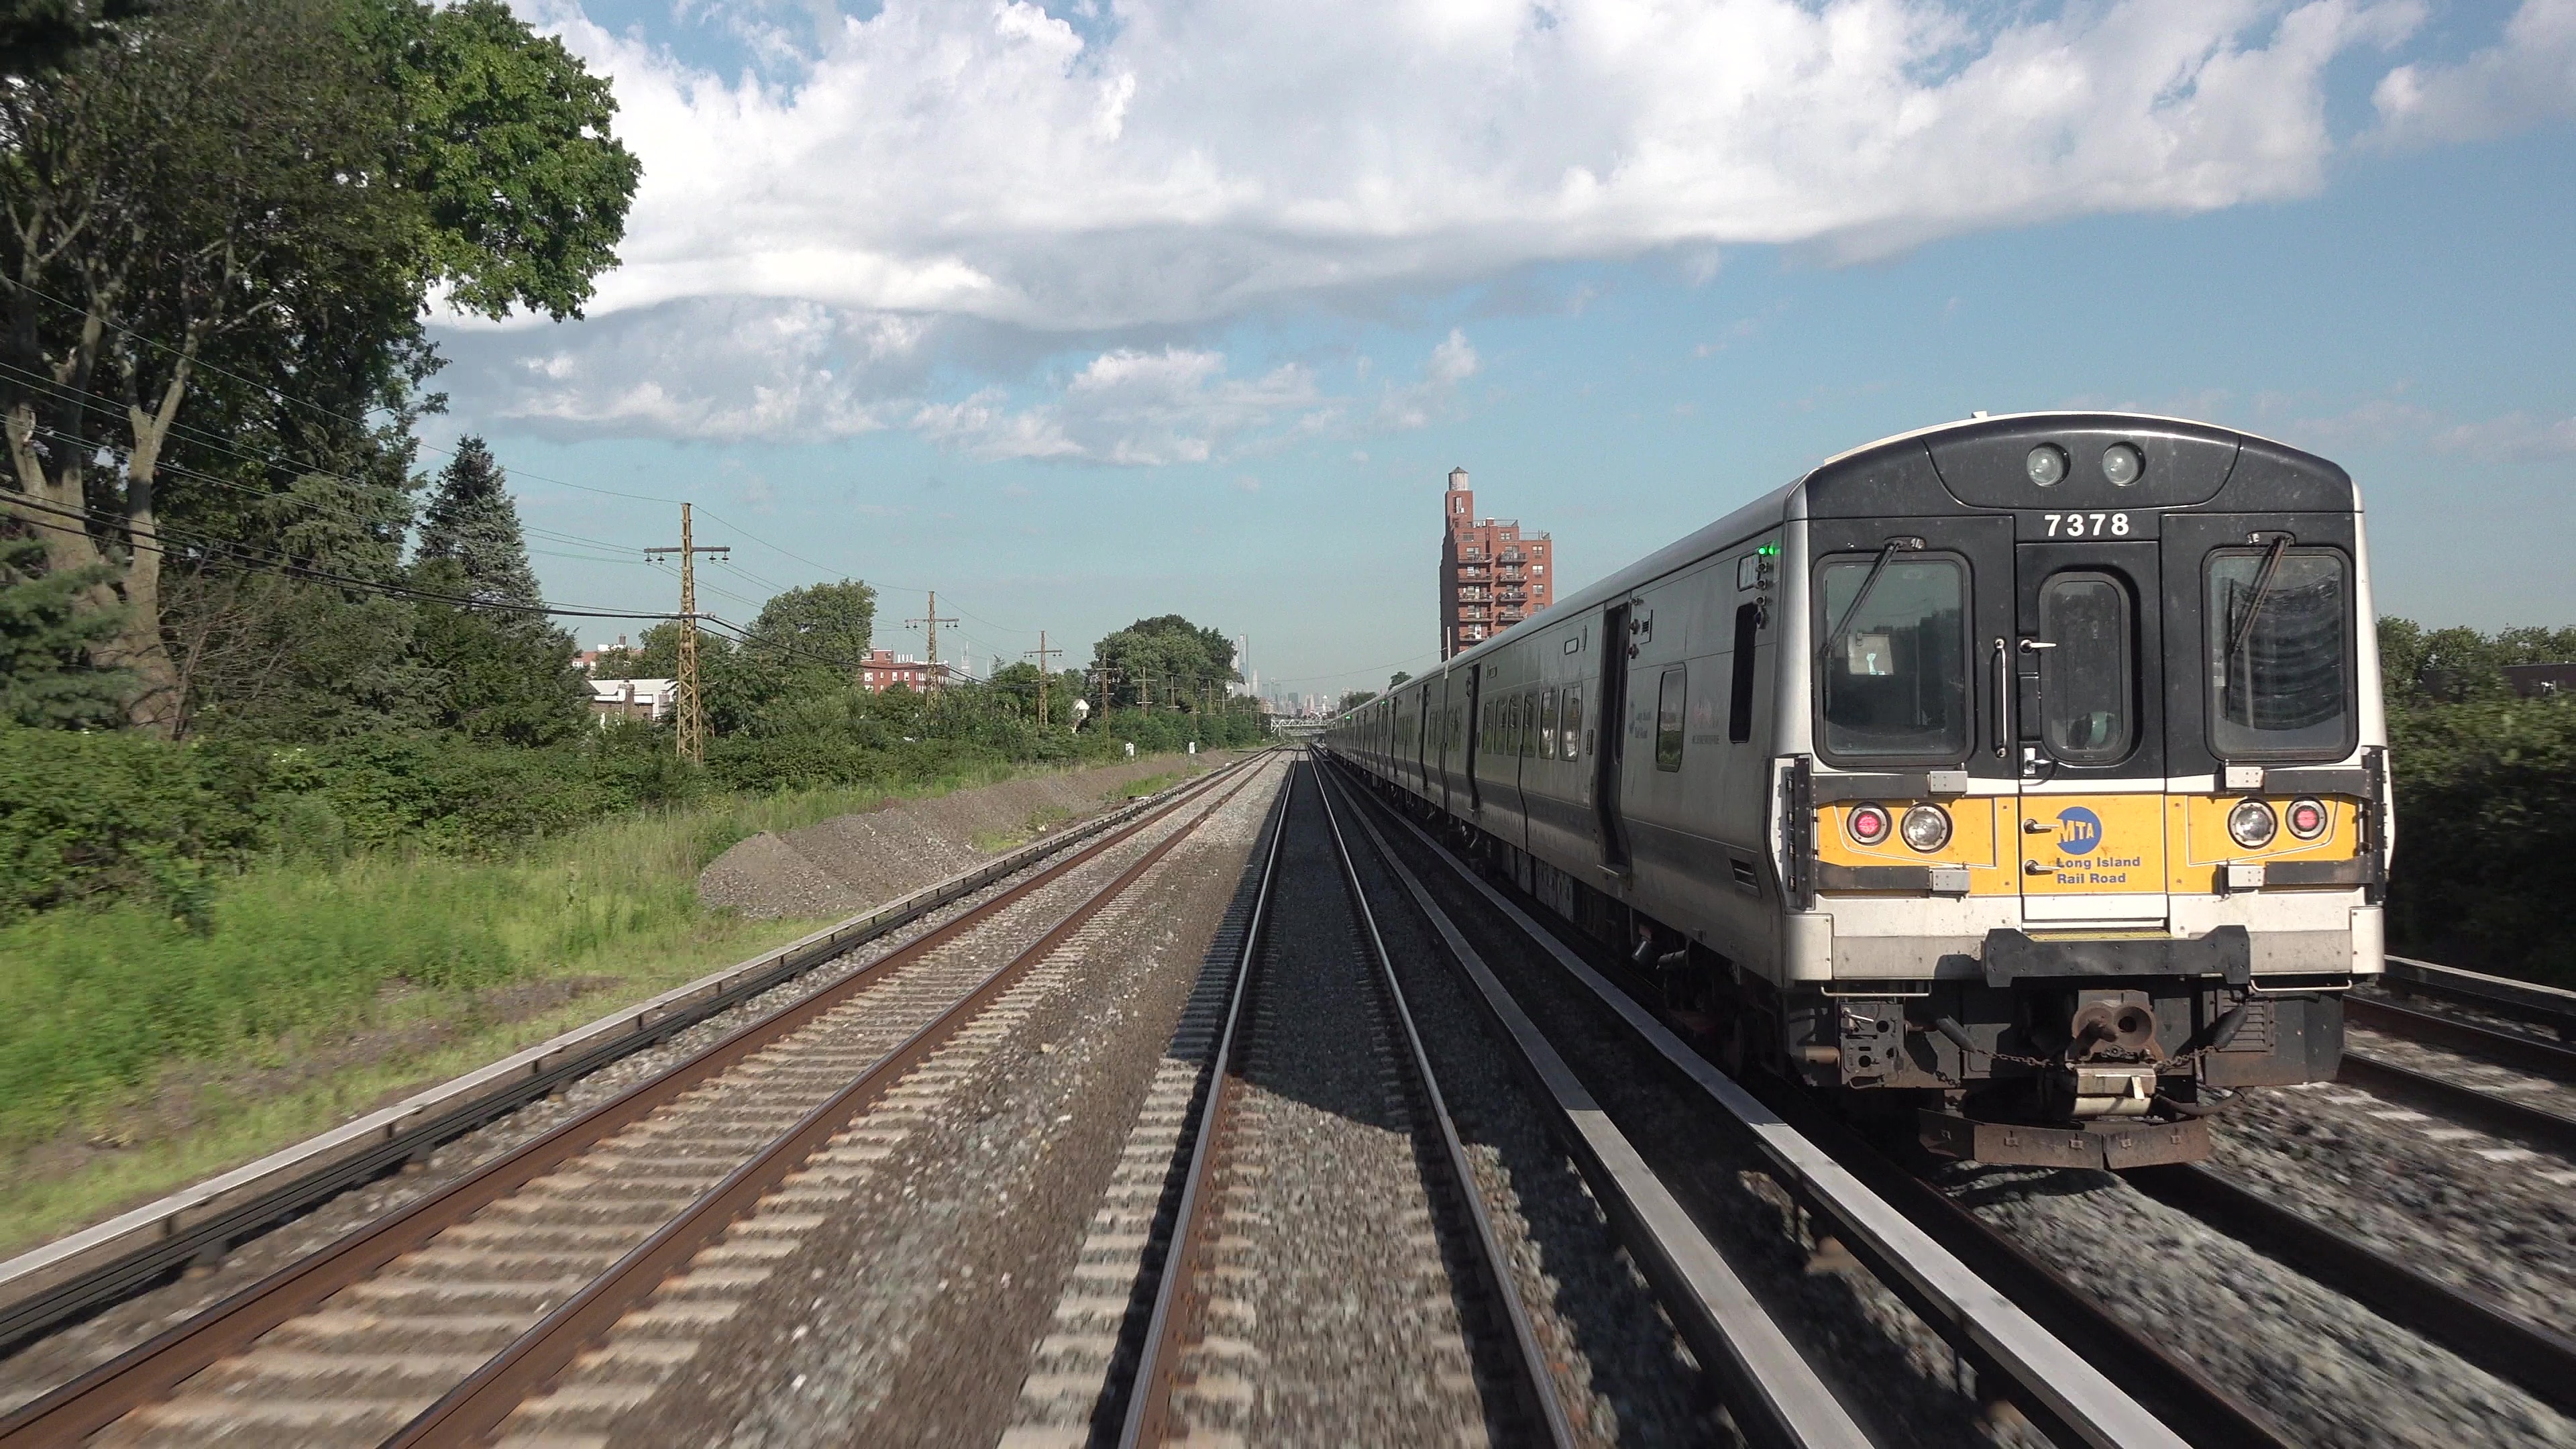 Monthly Railroad Commuters and Their Friends and Families Can Save and Explore the Region with 'Summer Saturdays' on LIRR and Metro-North